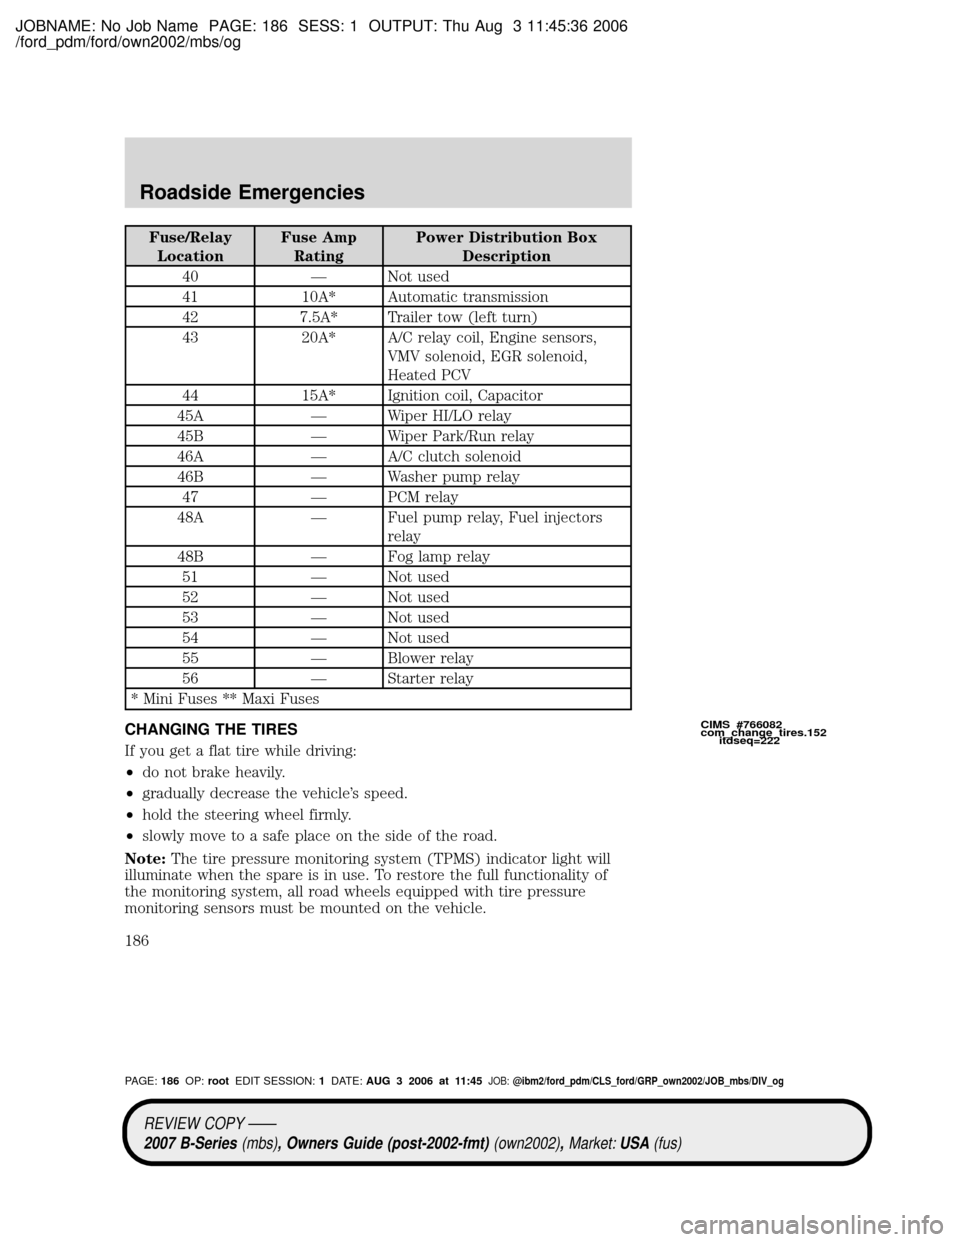 MAZDA MODEL B2300 TRUCK 2007  Owners Manual (in English) JOBNAME: No Job Name PAGE: 186 SESS: 1 OUTPUT: Thu Aug 3 11:45:36 2006
/ford_pdm/ford/own2002/mbs/og
Fuse/Relay
LocationFuse Amp
RatingPower Distribution Box
Description
40 Ð Not used
41 10A* Automat